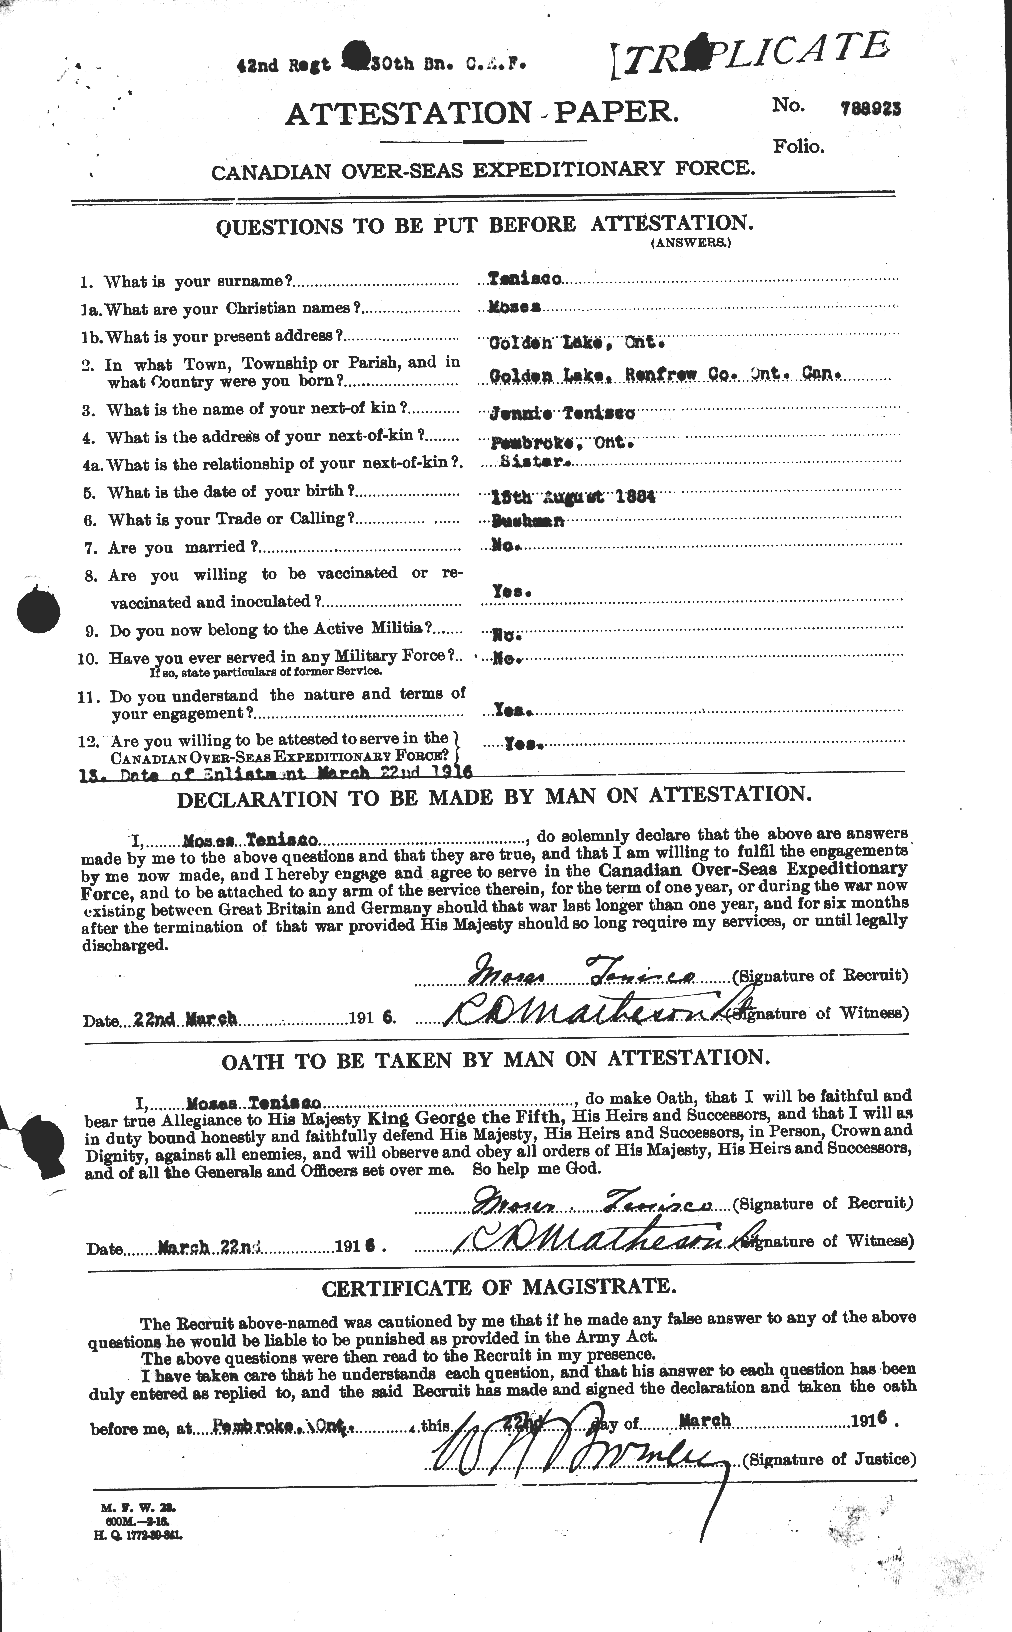 Personnel Records of the First World War - CEF 629380a